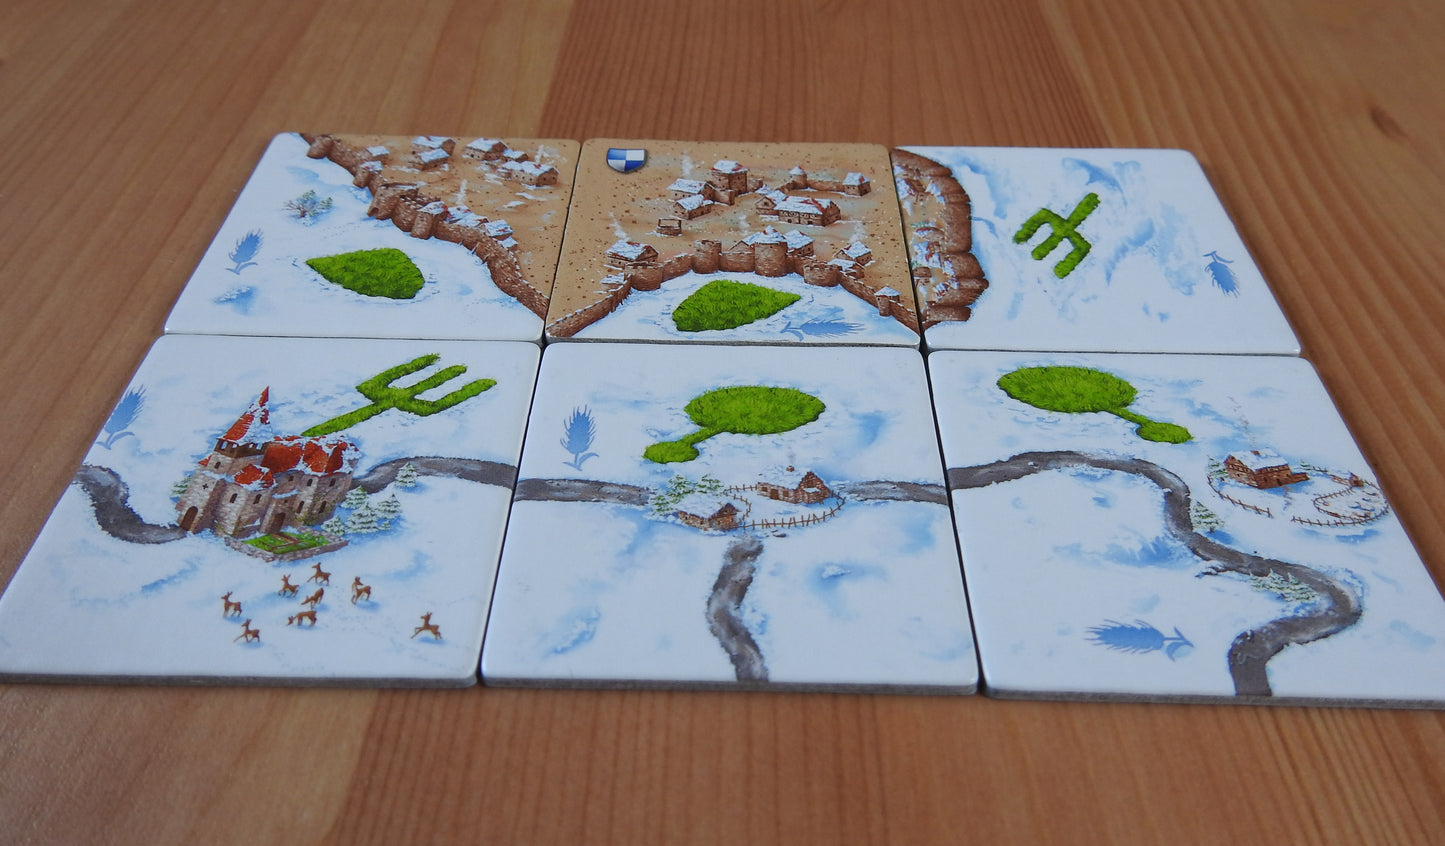 Long view of the 6 winter tiles shown at an angle.